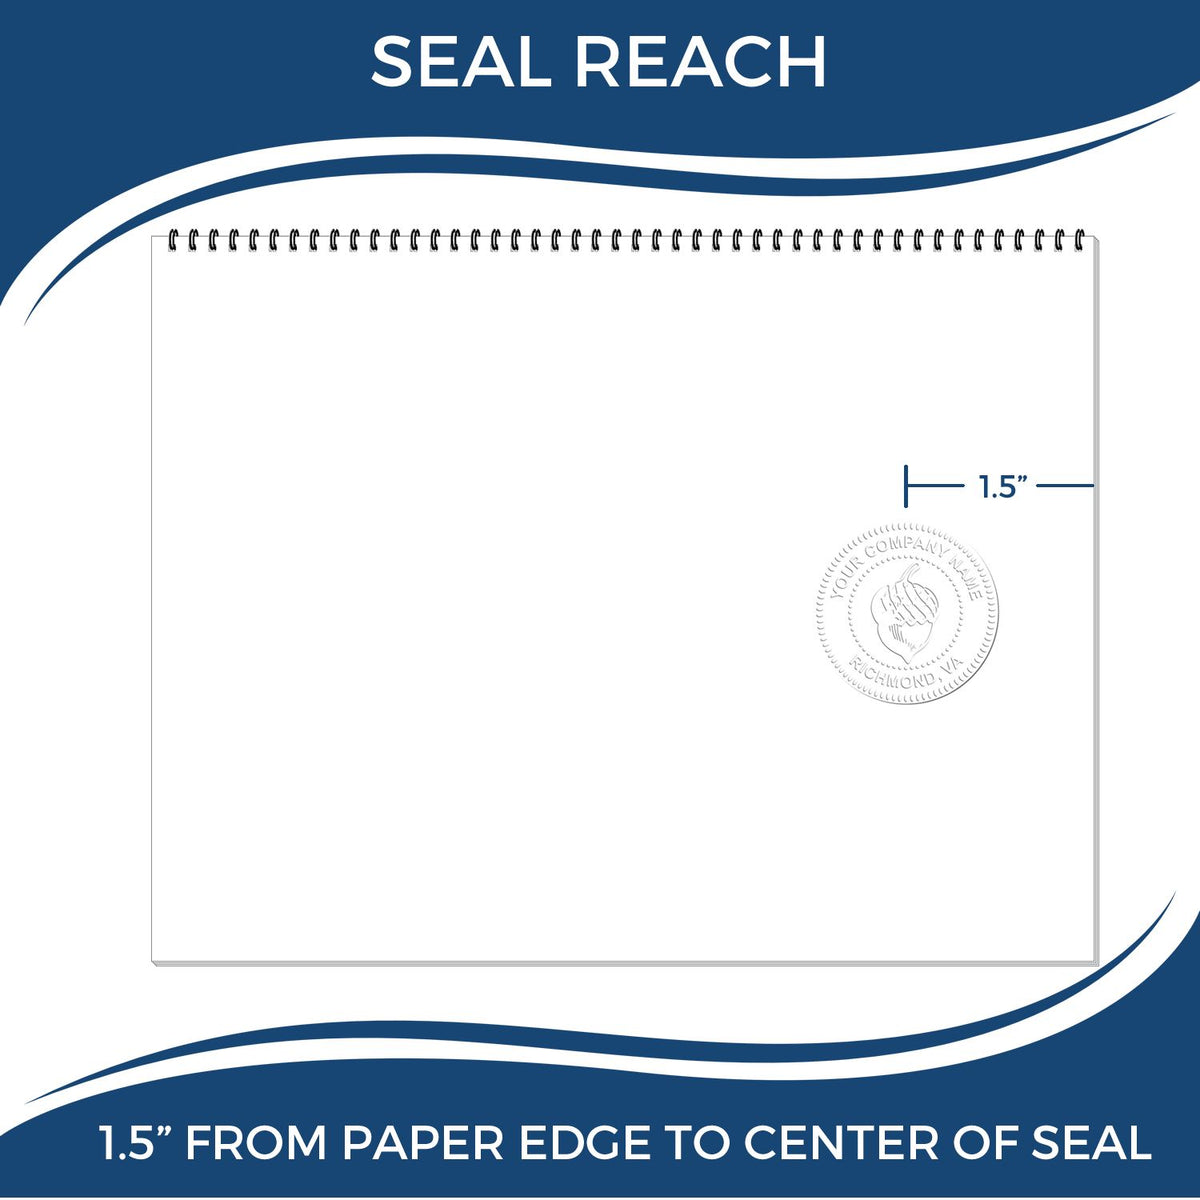 An infographic showing the seal reach which is represented by a ruler and a miniature seal image of the Minnesota Desk Architect Embossing Seal